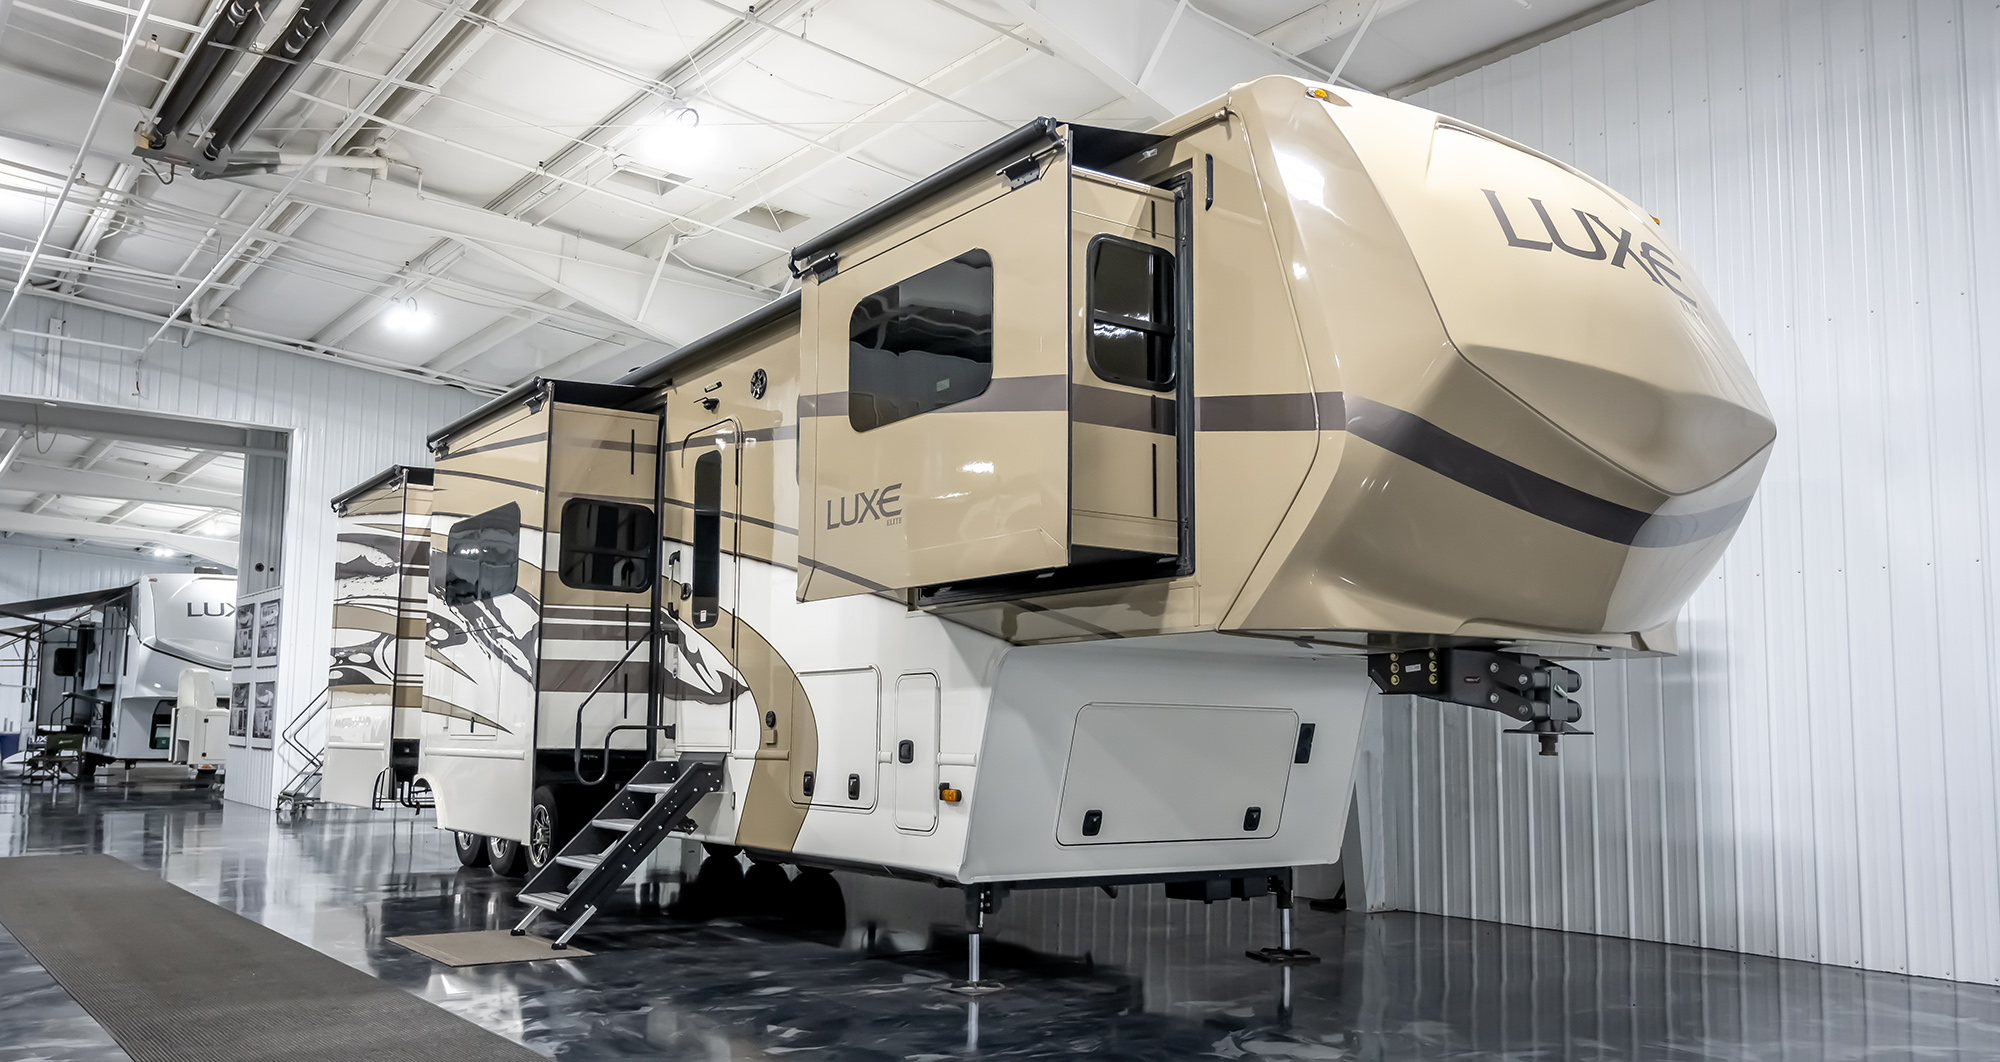 A Luxe Elite on display at the Luxe 5th Wheel showroom in Elkhart, Indiana.